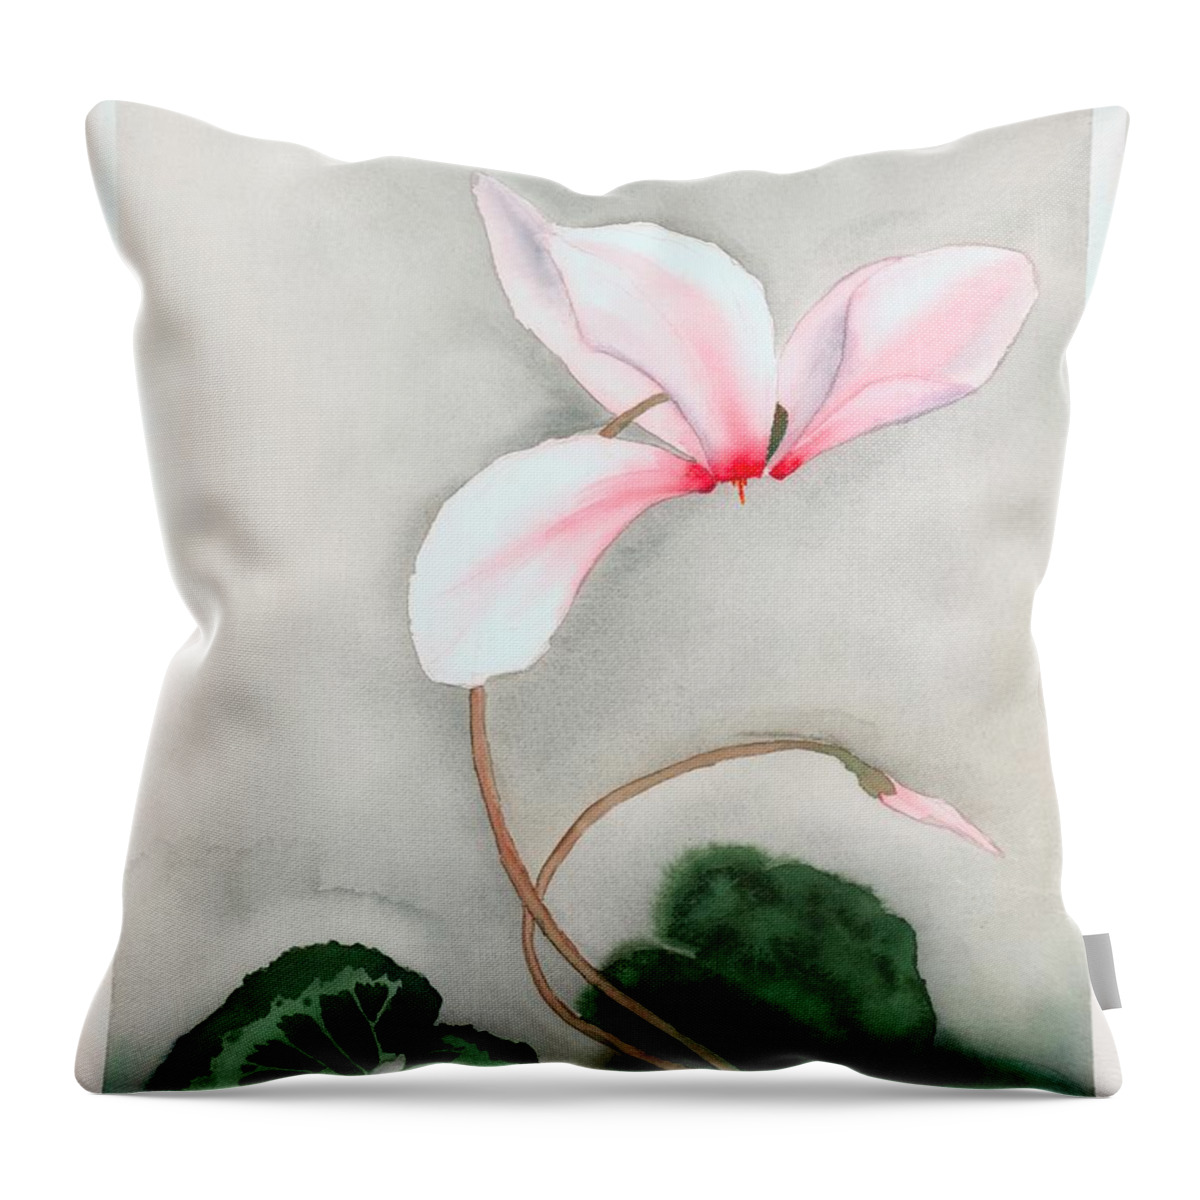 Floral Throw Pillow featuring the painting Cyclamen Dancer by Hilda Wagner